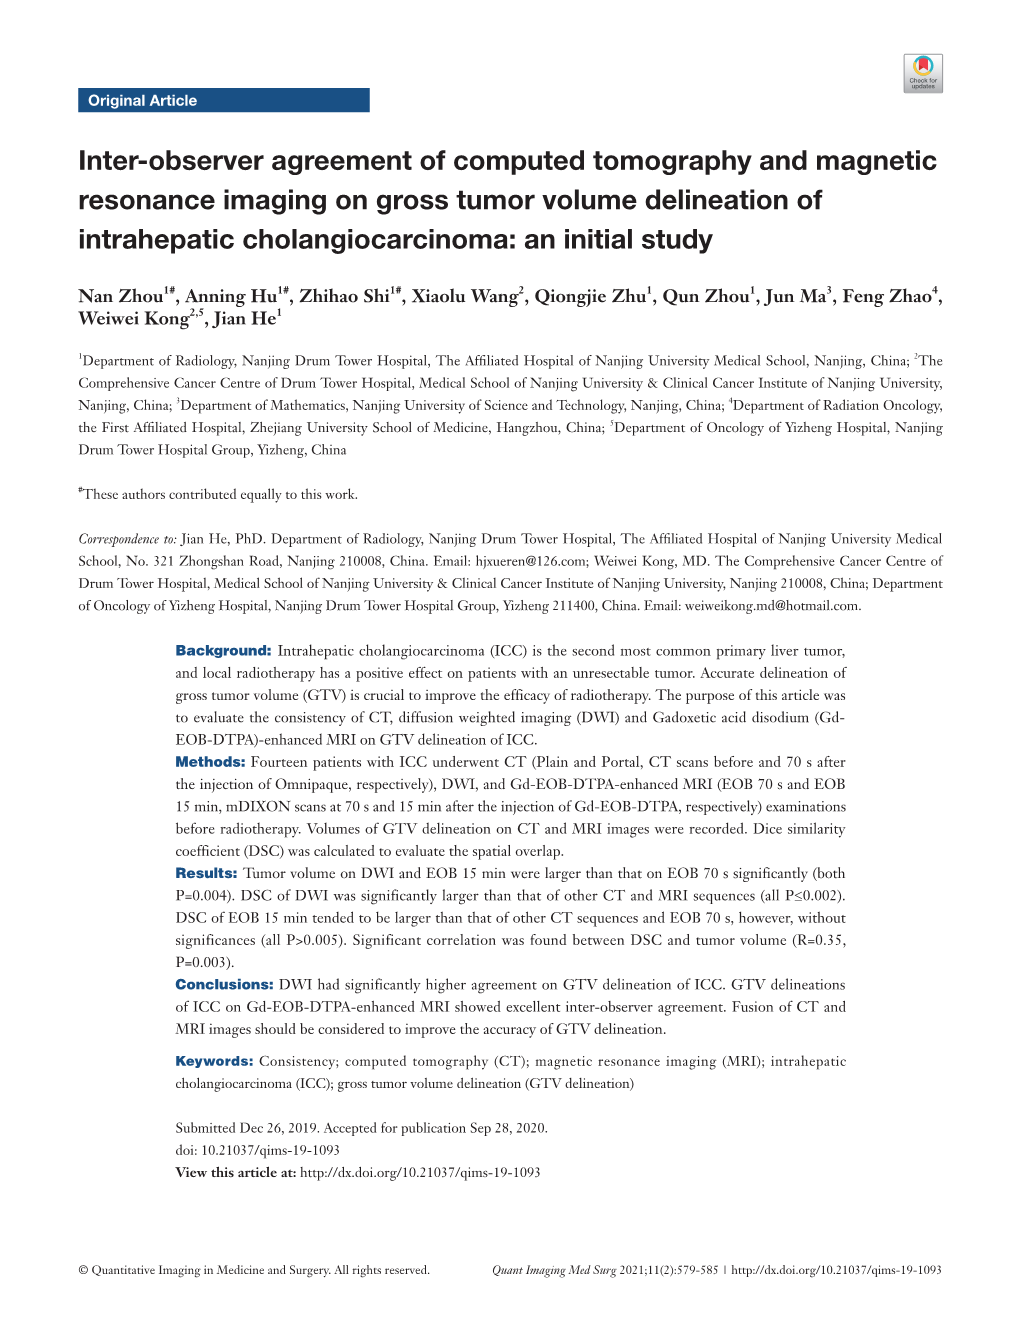 Inter-Observer Agreement of Computed Tomography and Magnetic Resonance Imaging on Gross Tumor Volume Delineation of Intrahepatic Cholangiocarcinoma: an Initial Study